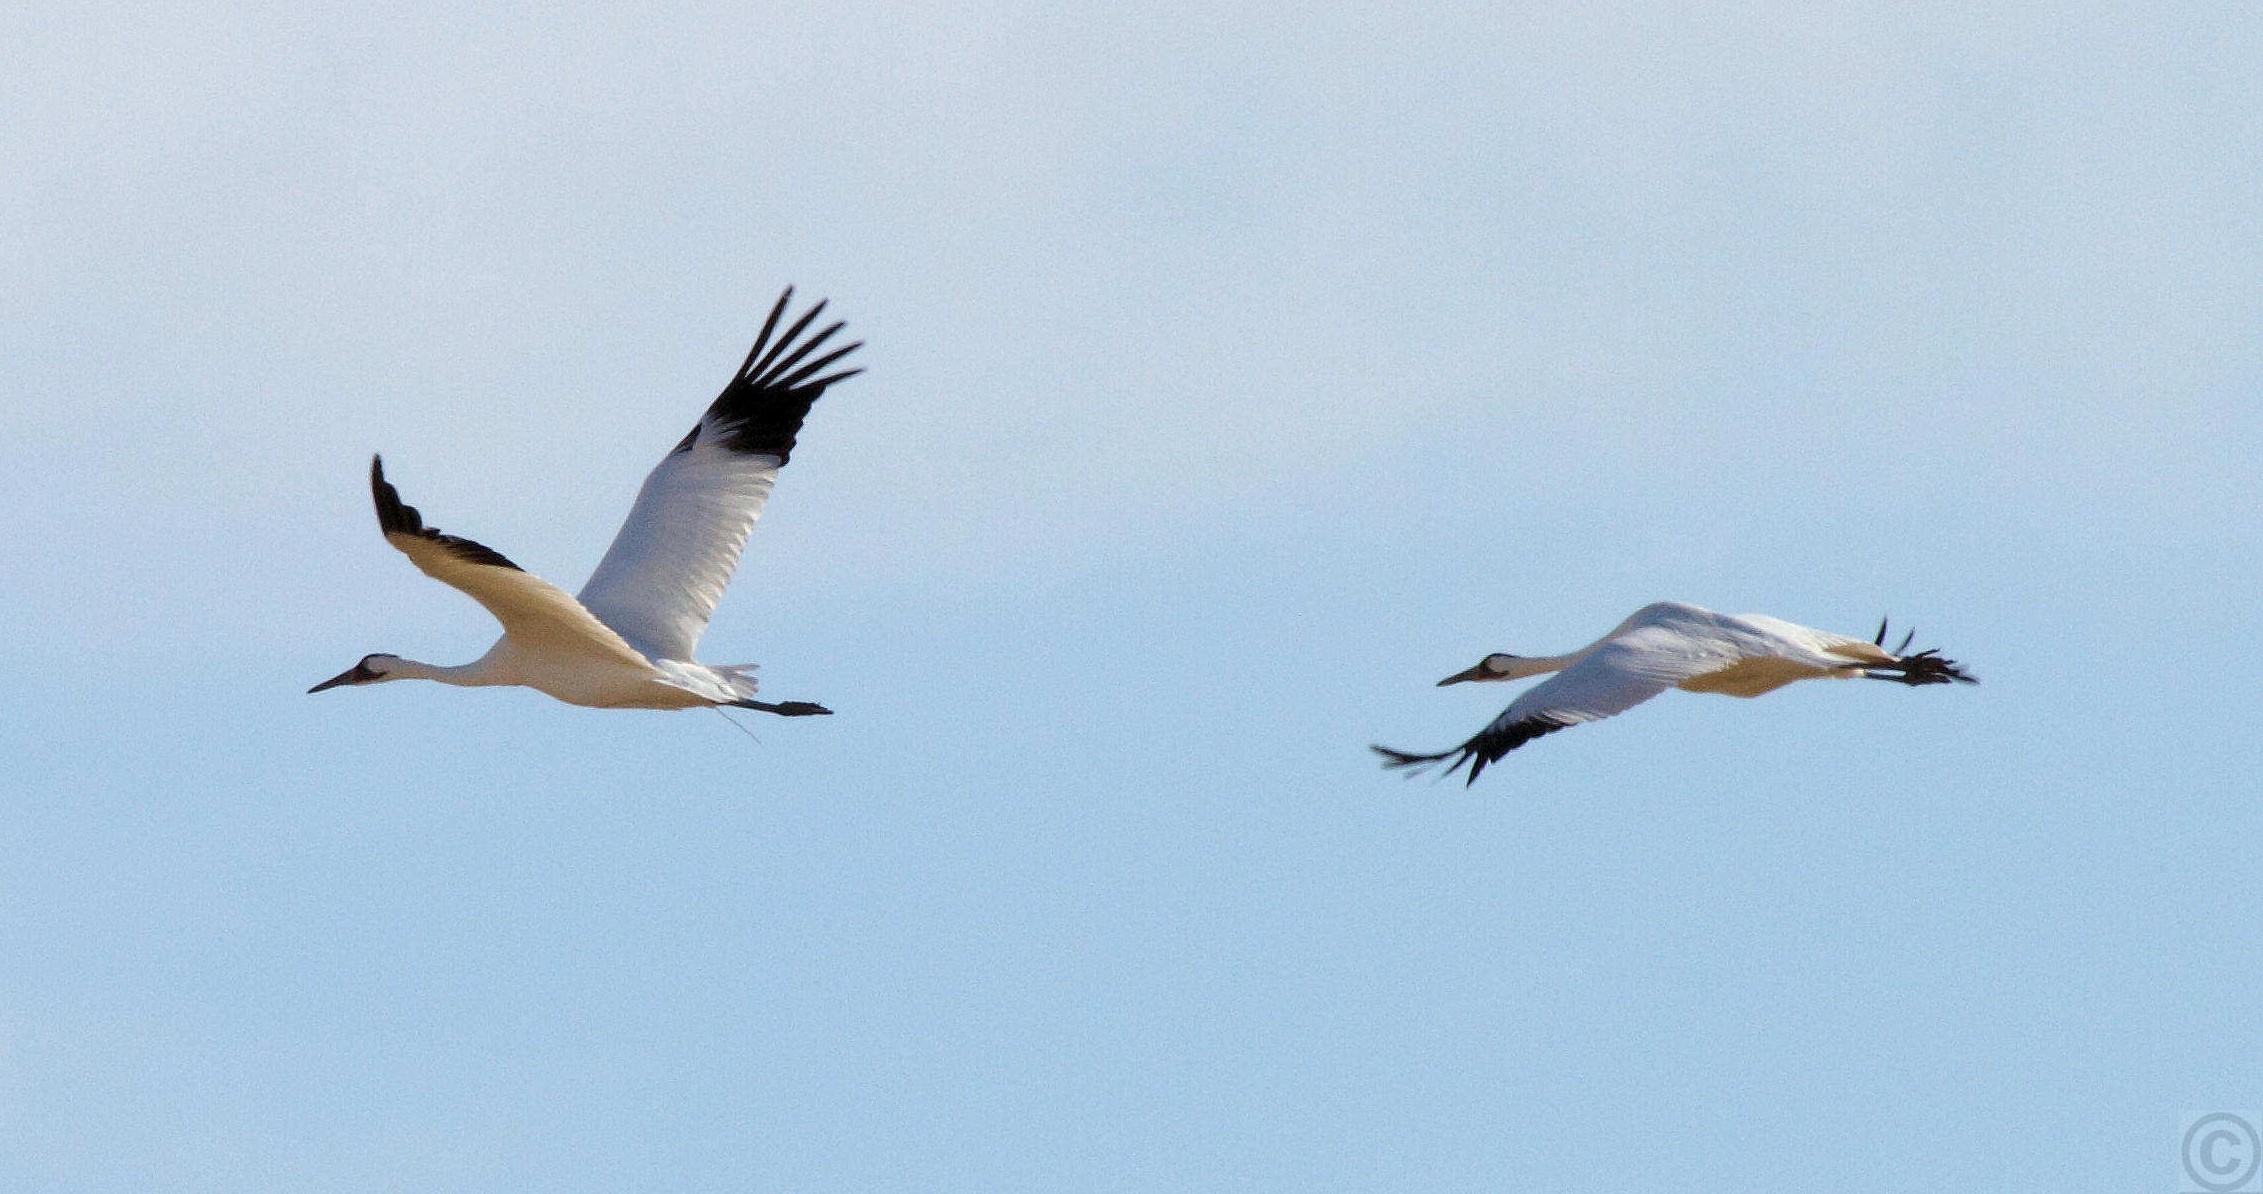 Nature Sask “dismayed and angry” over whooping cranes shot in